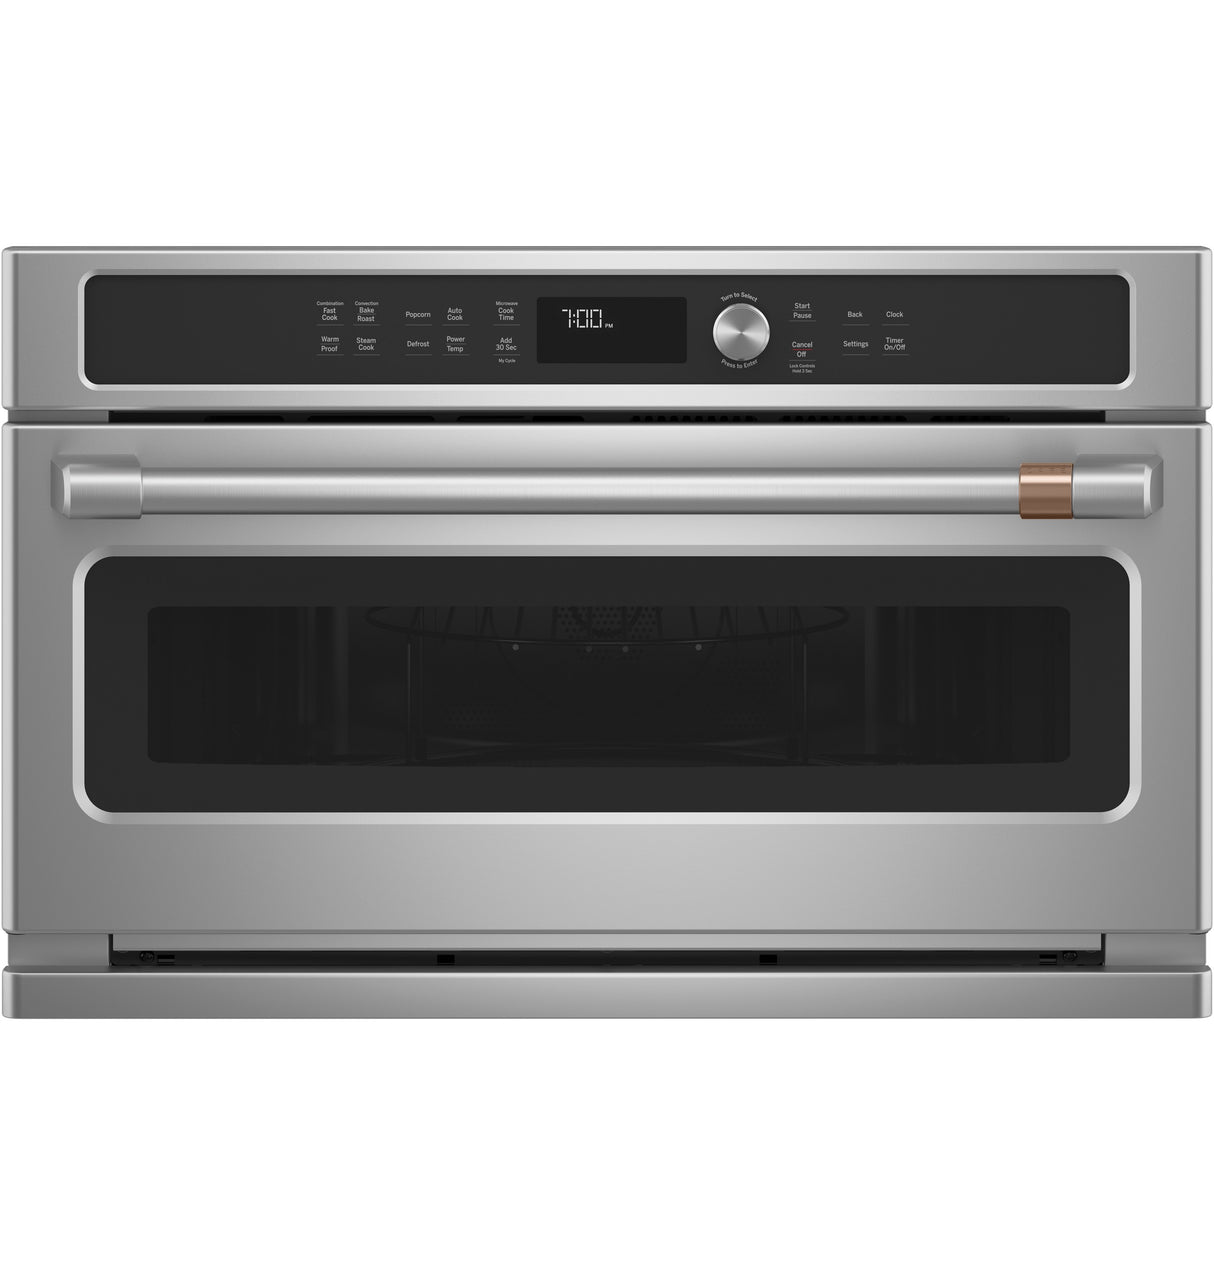 Caf(eback)(TM) Built-In Microwave/Convection Oven - (CWB713P2NS1)